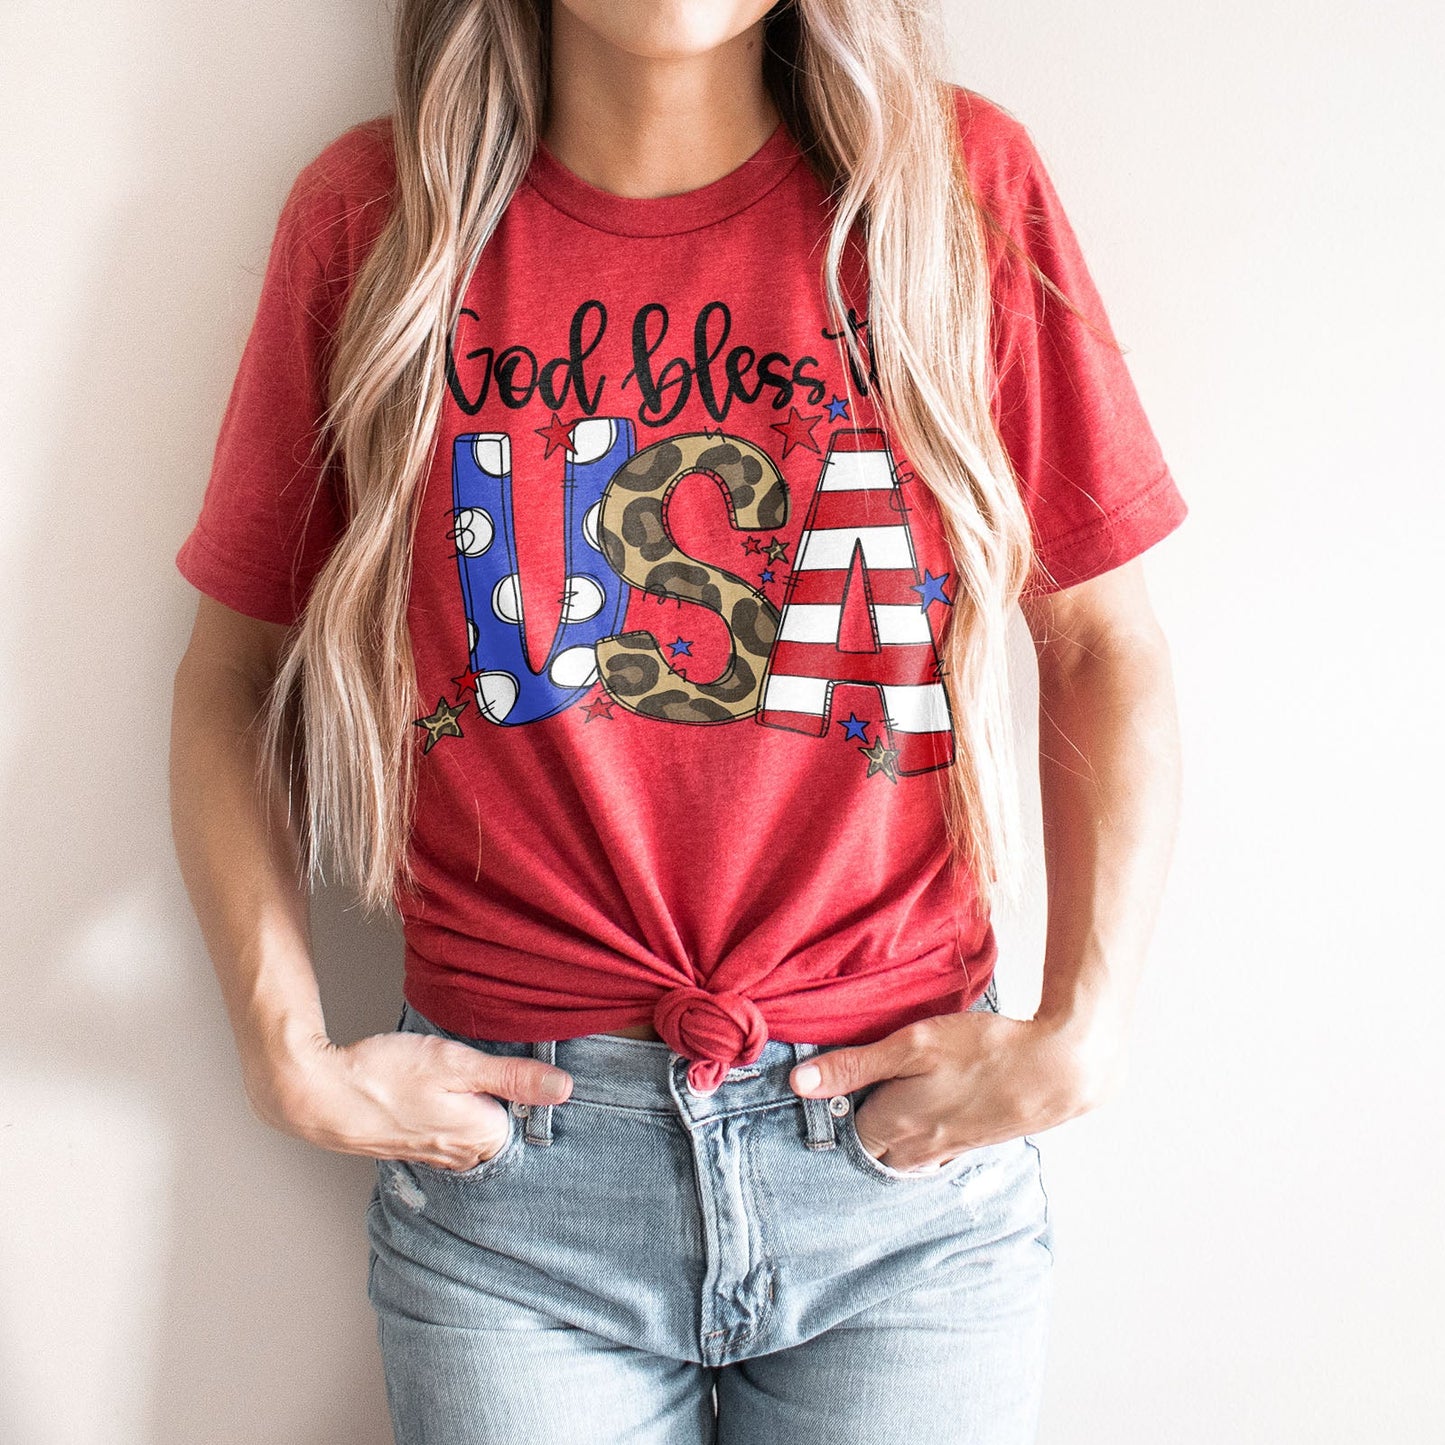 God Bless The USA Tee Shirts For Women - Christian Shirts for Women - Religious Tee Shirts